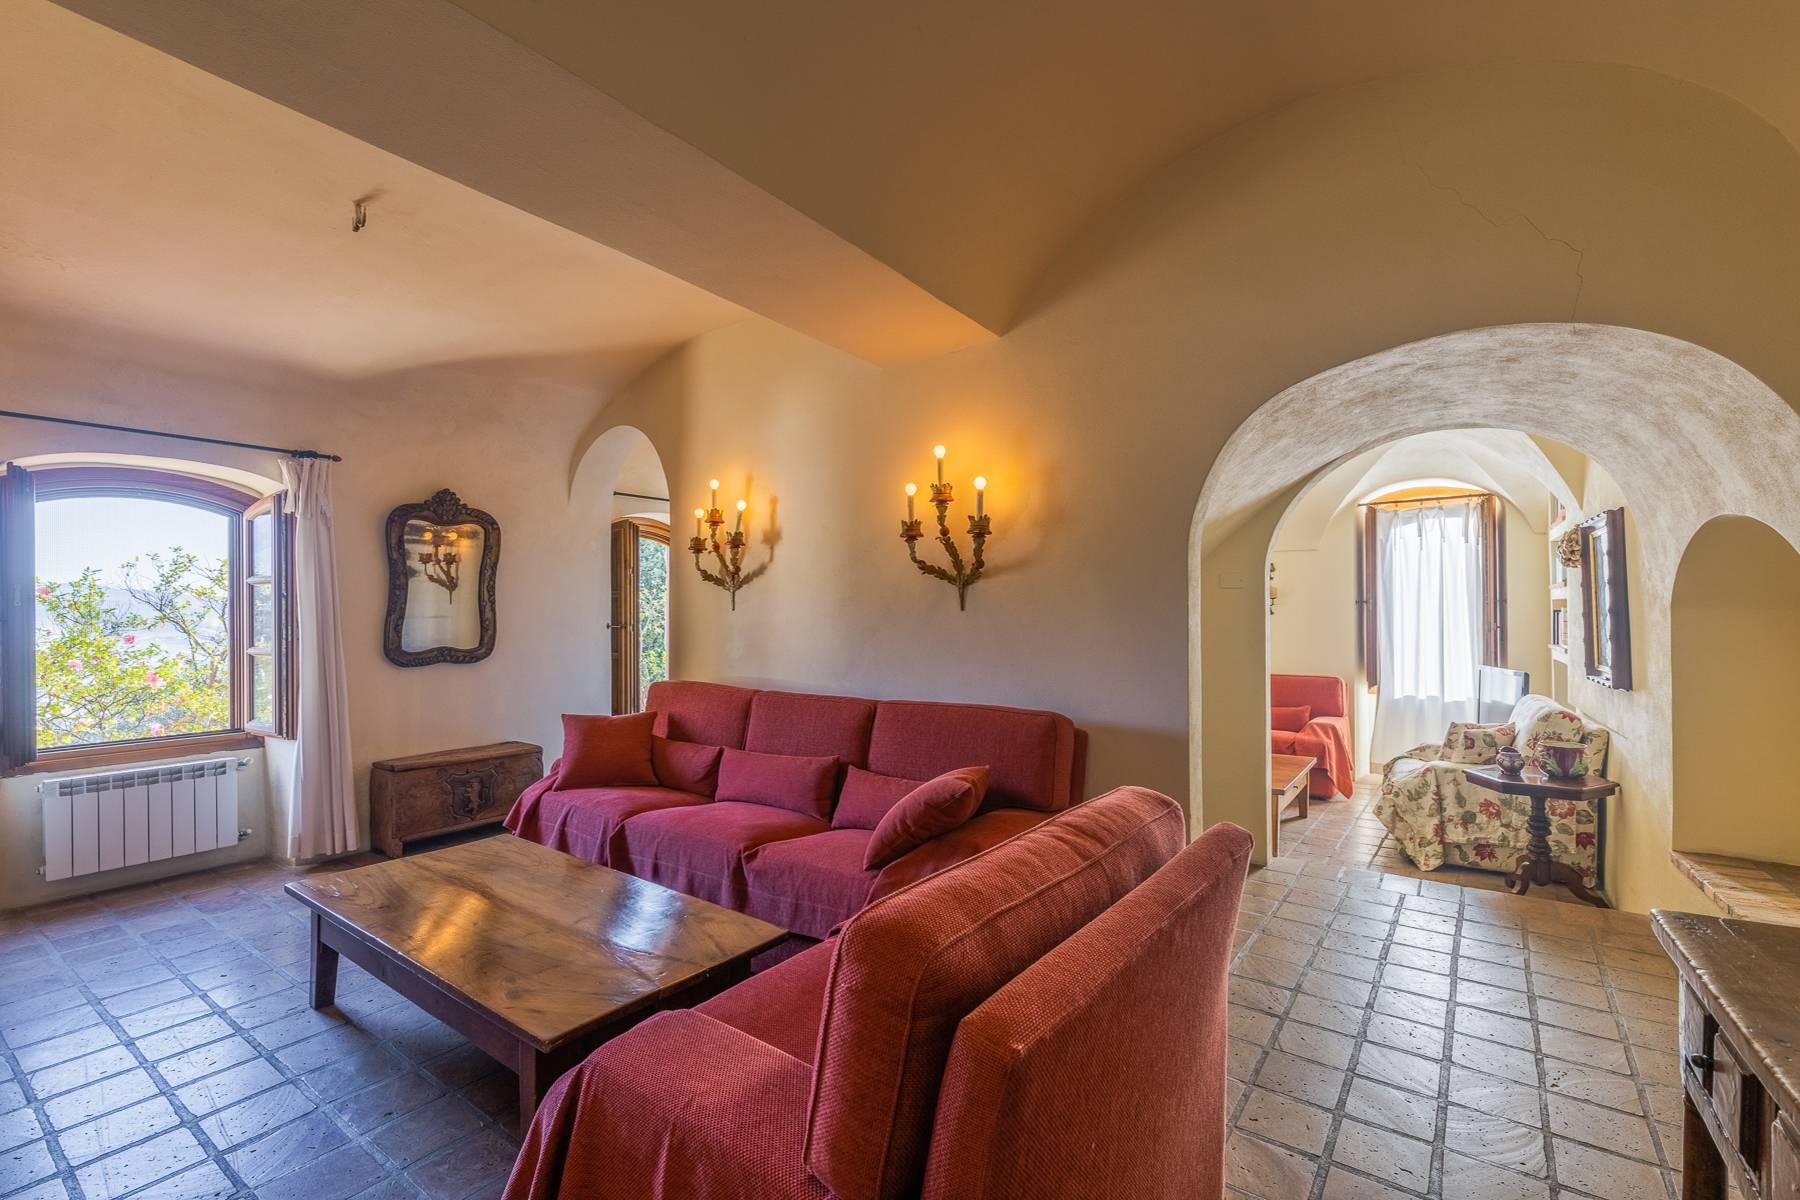 Charming villa in Torre Saracena, nestled in a tiny historic village overlooking Sanremo - Private Auction - 18